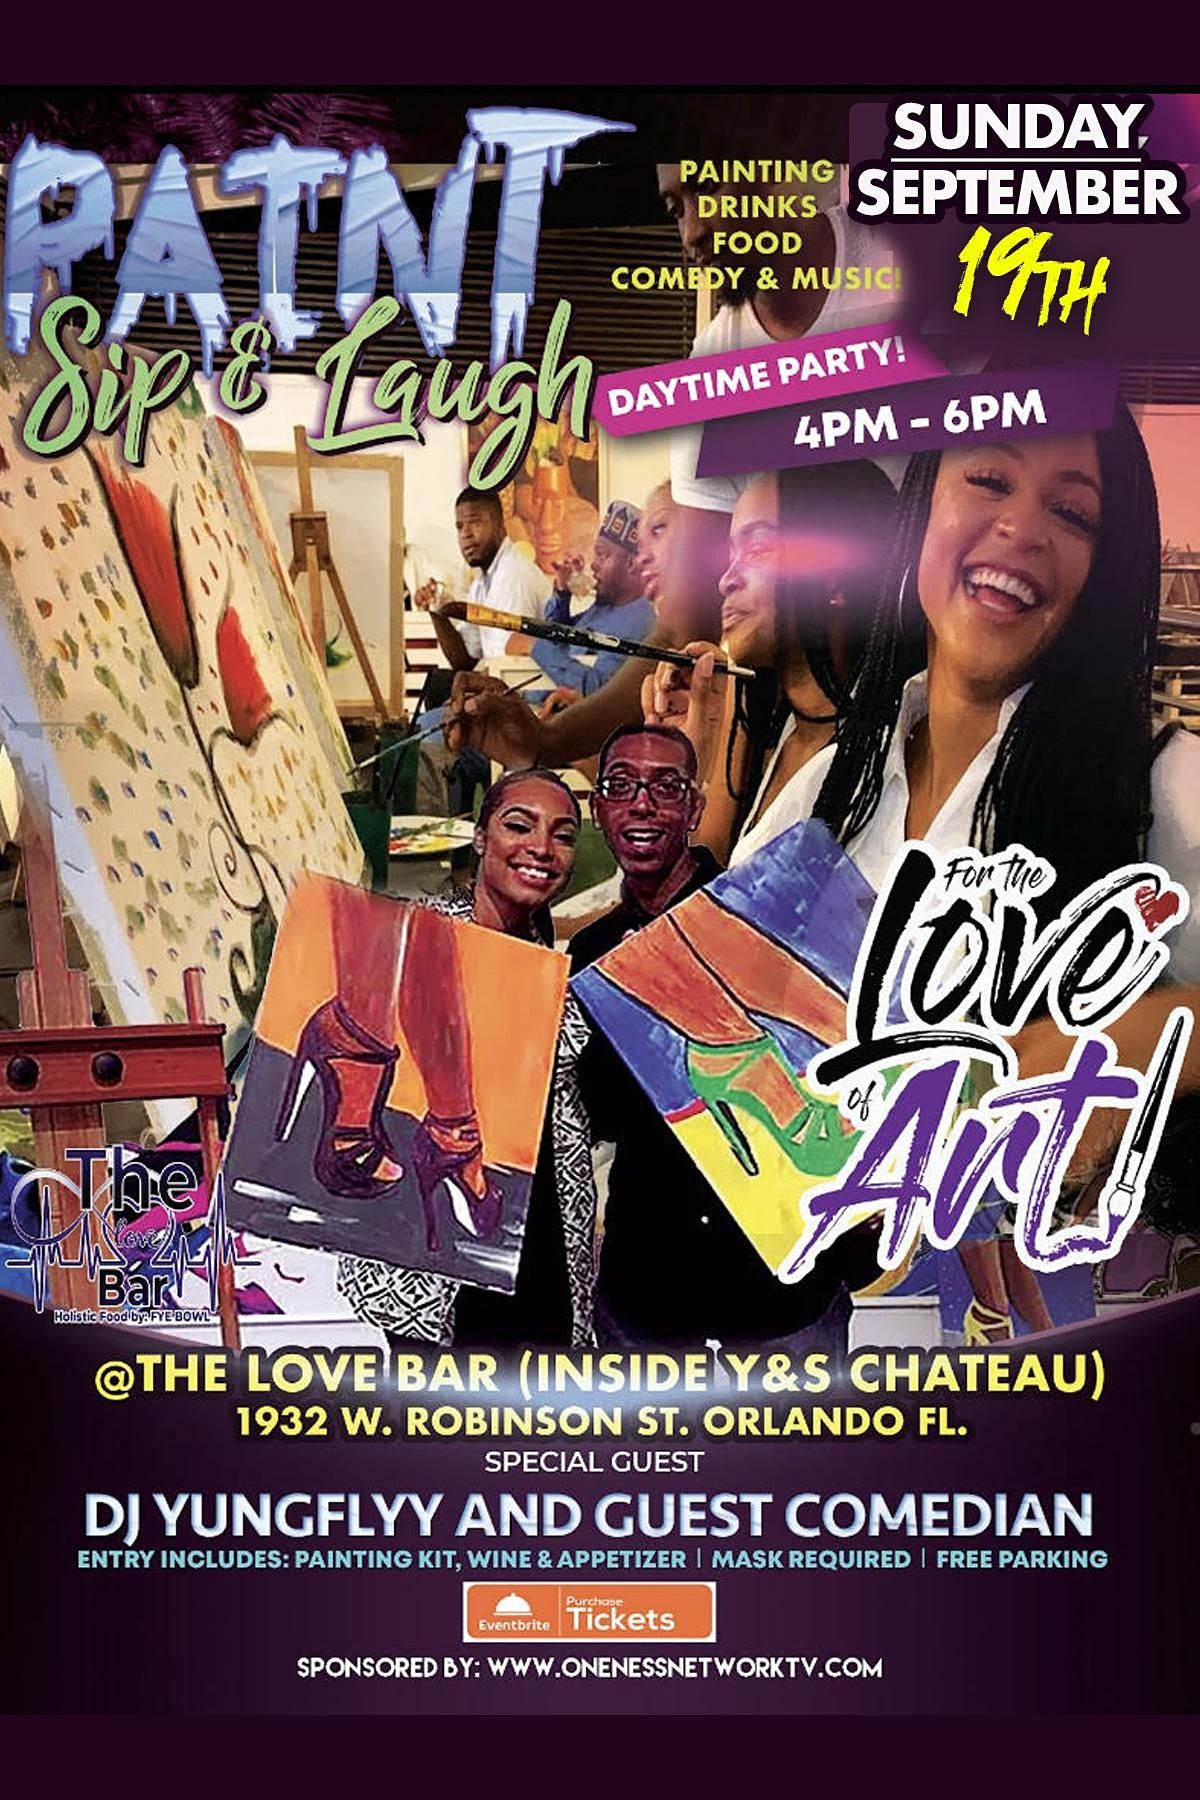 PAINT, SIP & LAUGH! PAINTING| DRINKS | FOOD | COMEDY & MUSIC!